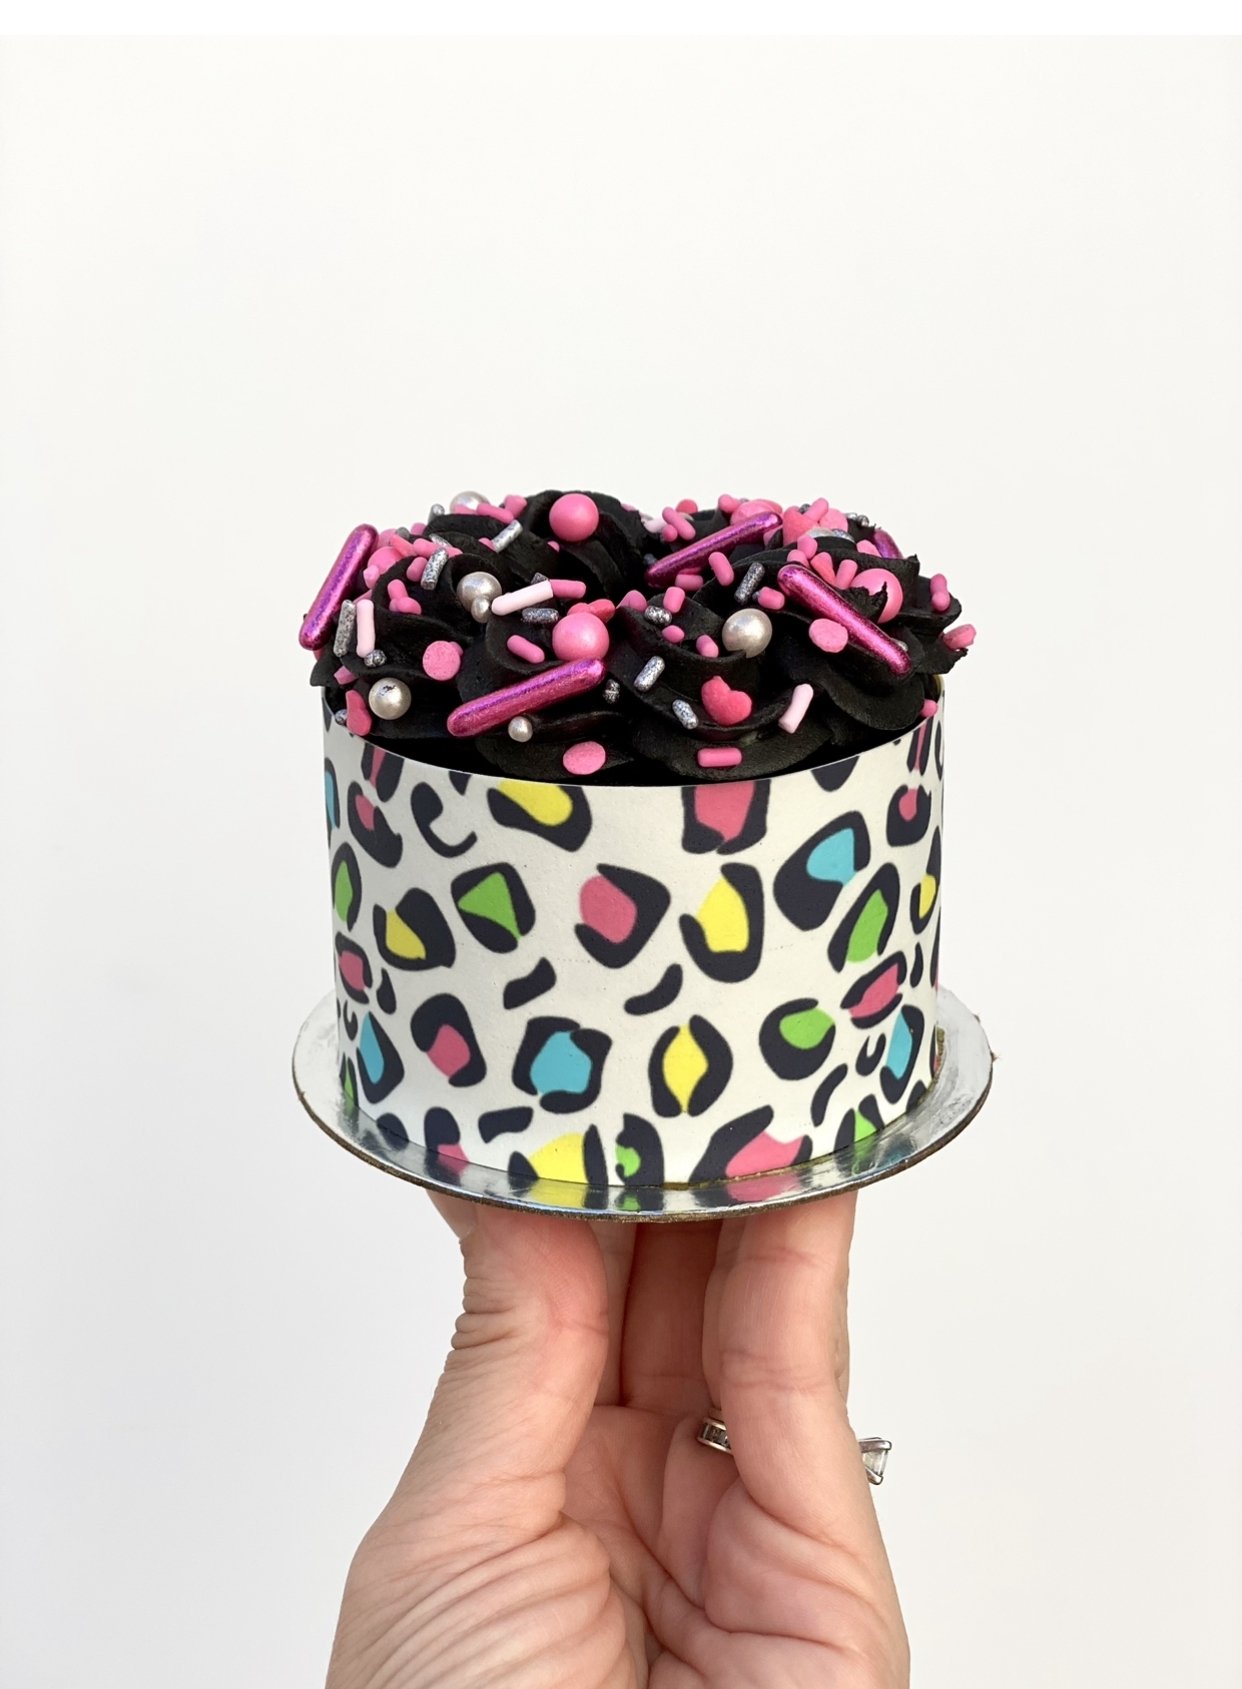 Cheetah cake for the birthday girl. The icing was sooo good. I want to... |  TikTok